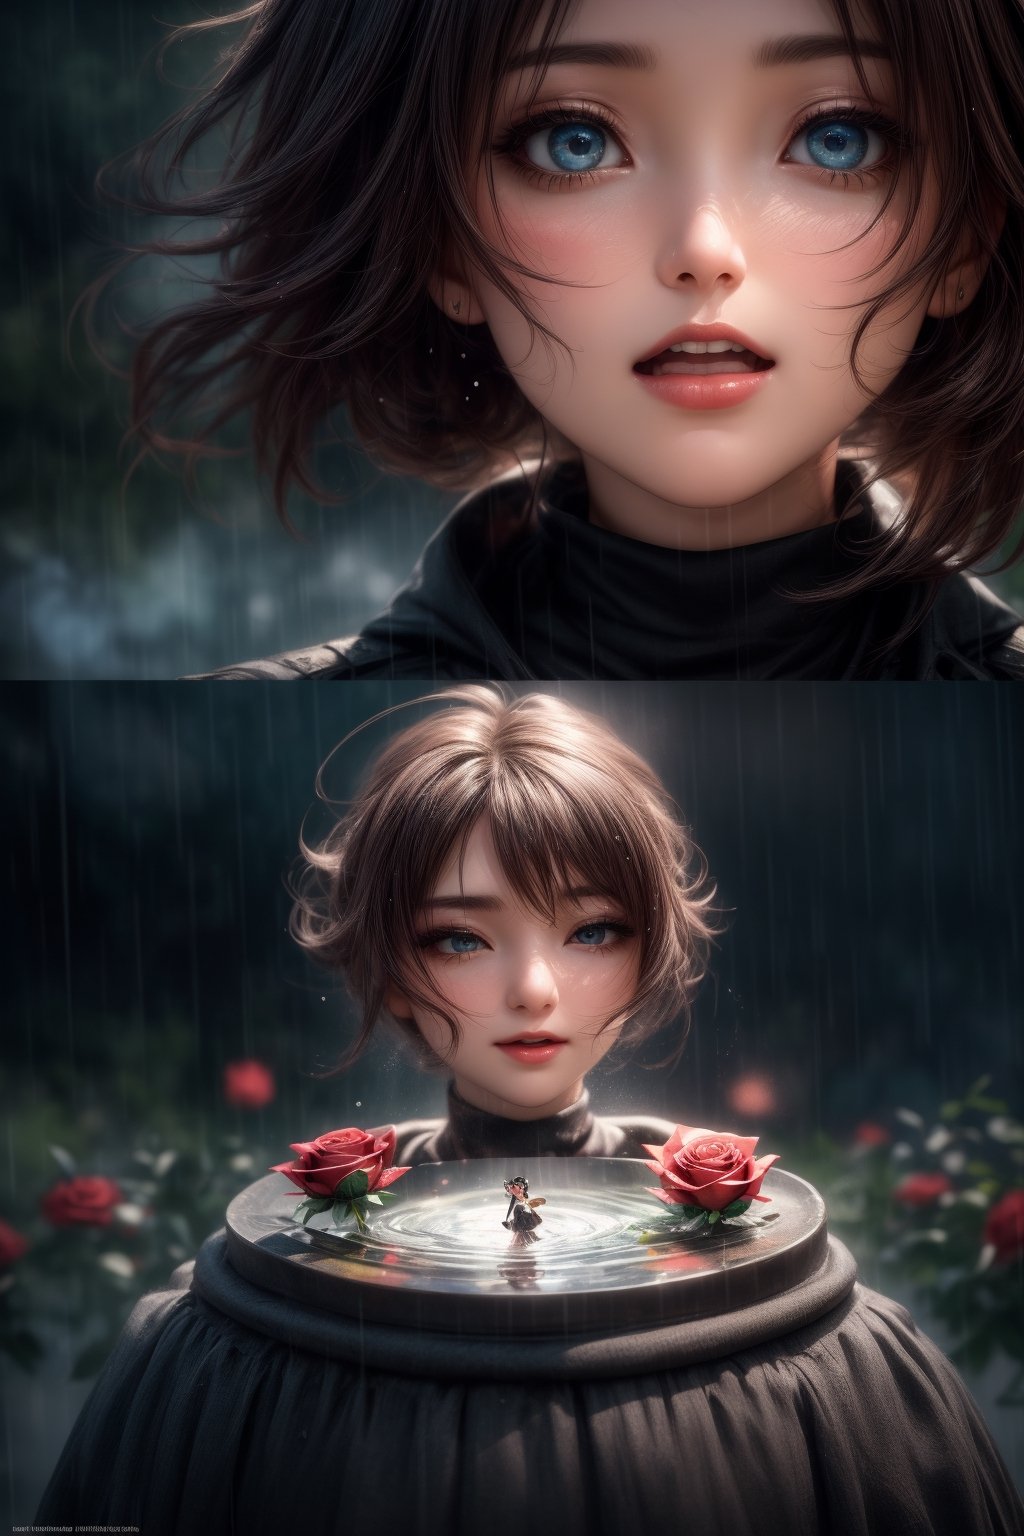 Take a deep breath and let's work on this problem step by step. expert consistency, dynamic action pose, INVISIBLE FIBONACCI WATERMARK - imagine the chibi diorama in Unreal Engine 5, which conveys the magic and charm of "Singing in the Rain". The main character of the girl is depicted in elegant and detailed poses, with charming details in their facial expressions and gestures. The background shows a Hollywood street in the rain, decorated with colorful roses, which give the scene a touch of romance and freshness. The mesmerizing lighting highlights the joy and optimism of the film.., High resolution, impeccable composition, realistic details, perfect proportions, stunning colors, mesmerizing lighting, interesting subjects, creative angle, attractive background, good timing, deliberate focus, balanced installation, harmonious colors, modern aesthetics, handmade with precision, vivid emotions, joyful impact, exceptional quality, powerful message, Raphael style, unreal engine 5,octane rendering, isometric, beautiful detailed eyes, super detailed face, eyes and clothes, More details, Blush,masterpiece,best quality, high resolution, more details XL